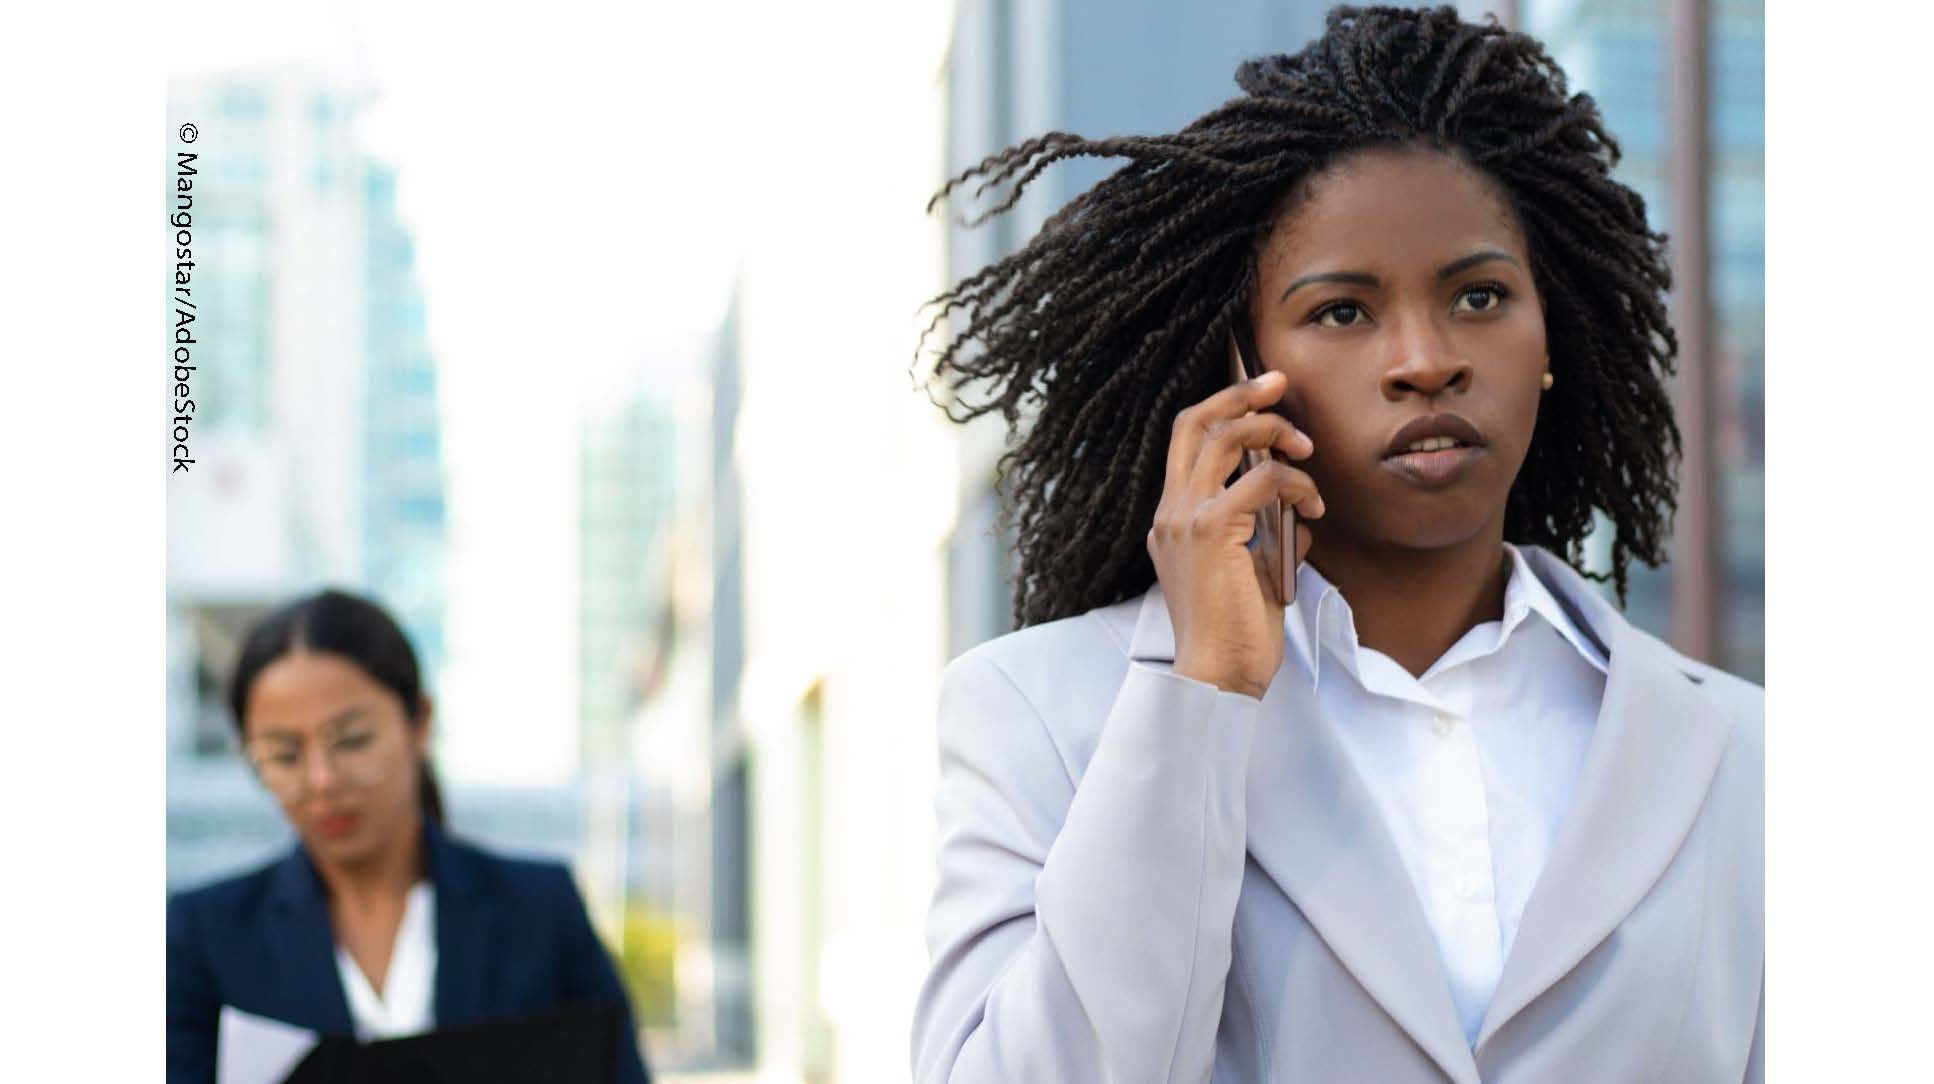 Ayana, a young woman in a business suit, is making a call on a cell phone. Another woman in glasses and a suit is standing in the distance, behind her.